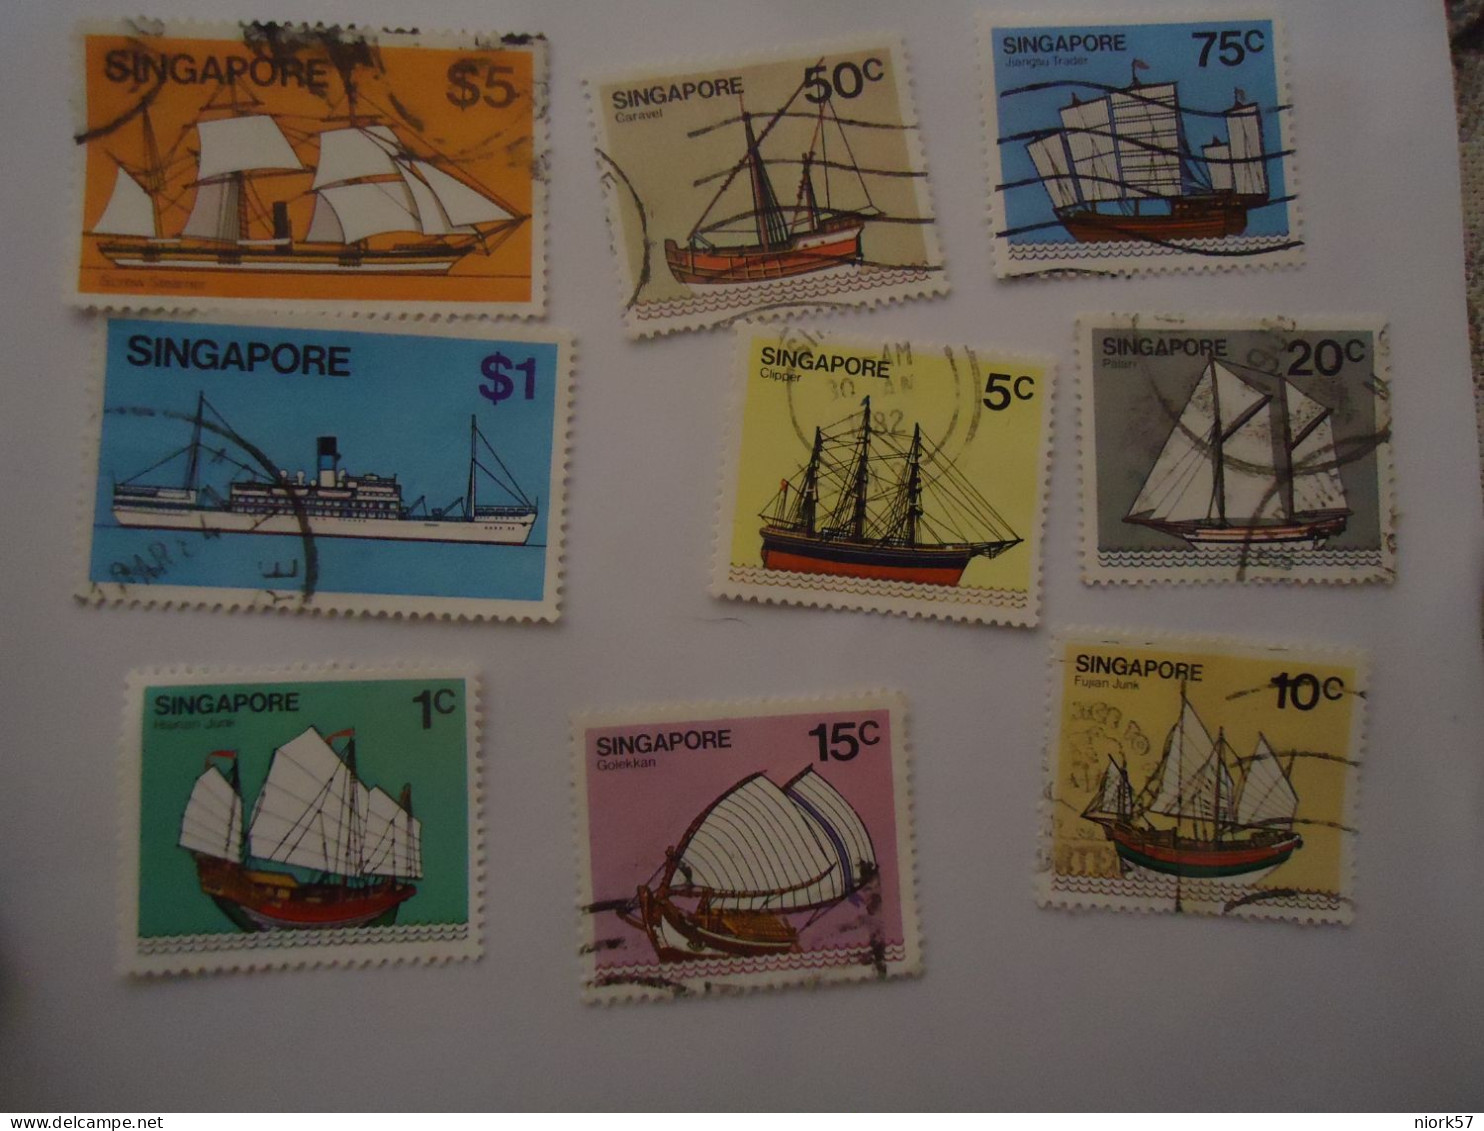 SINGAPORE  USED  9 STAMPS   SHIP SHIPS  BOATS - Ships